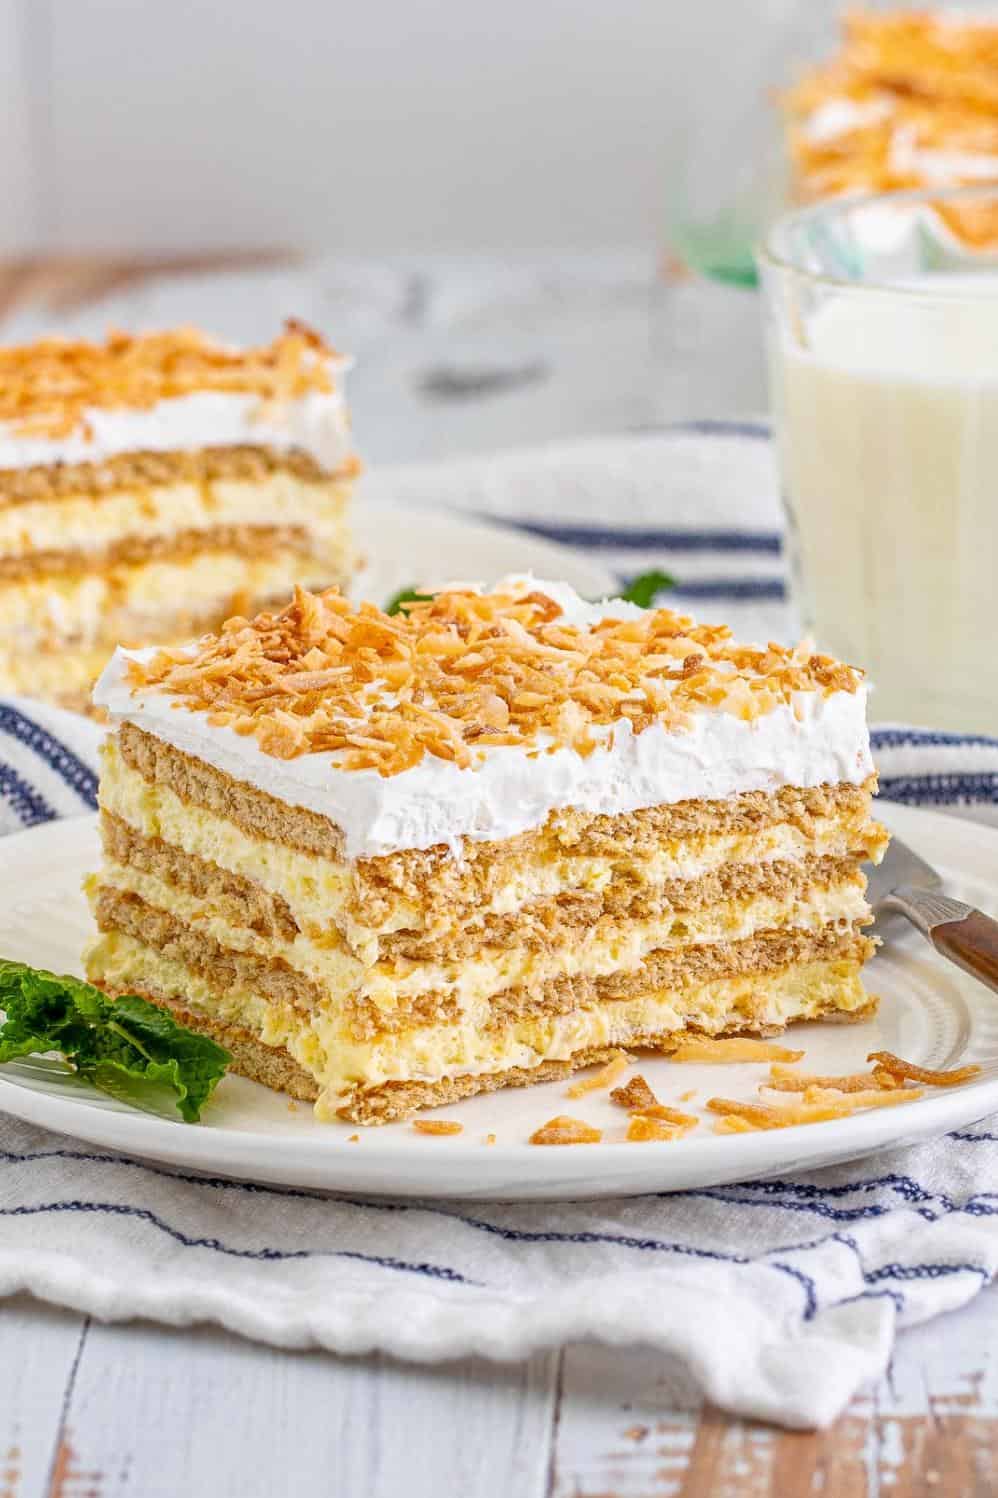  Indulge in layers of creamy goodness.